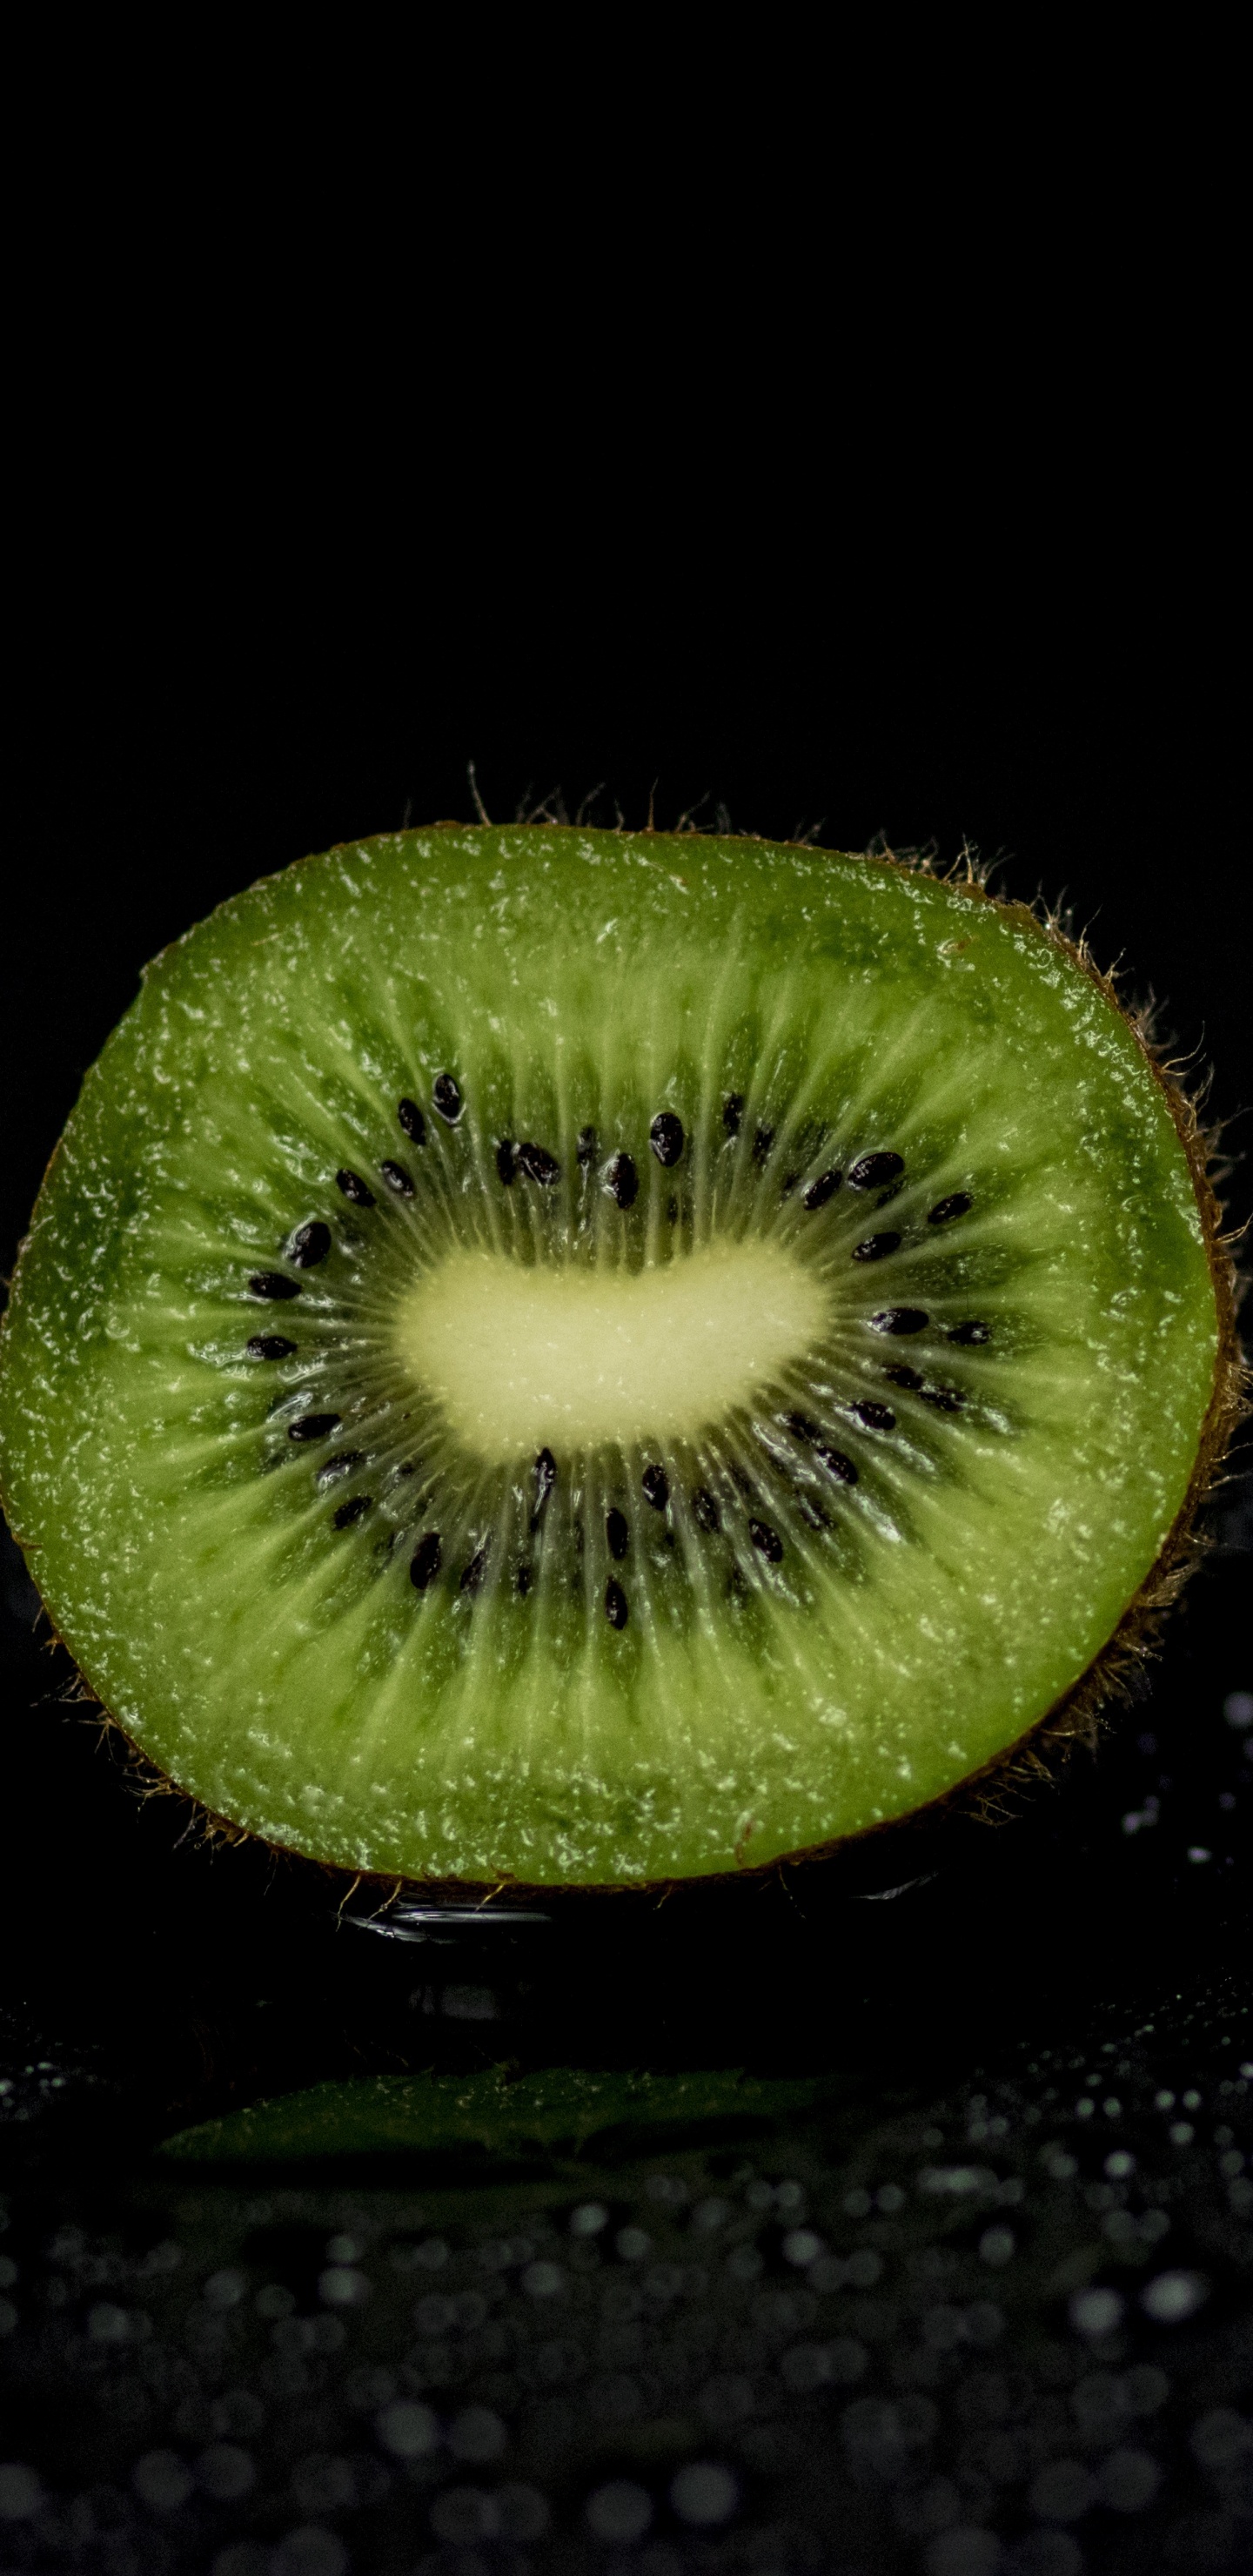 Green Round Fruit on Black Surface. Wallpaper in 1440x2960 Resolution